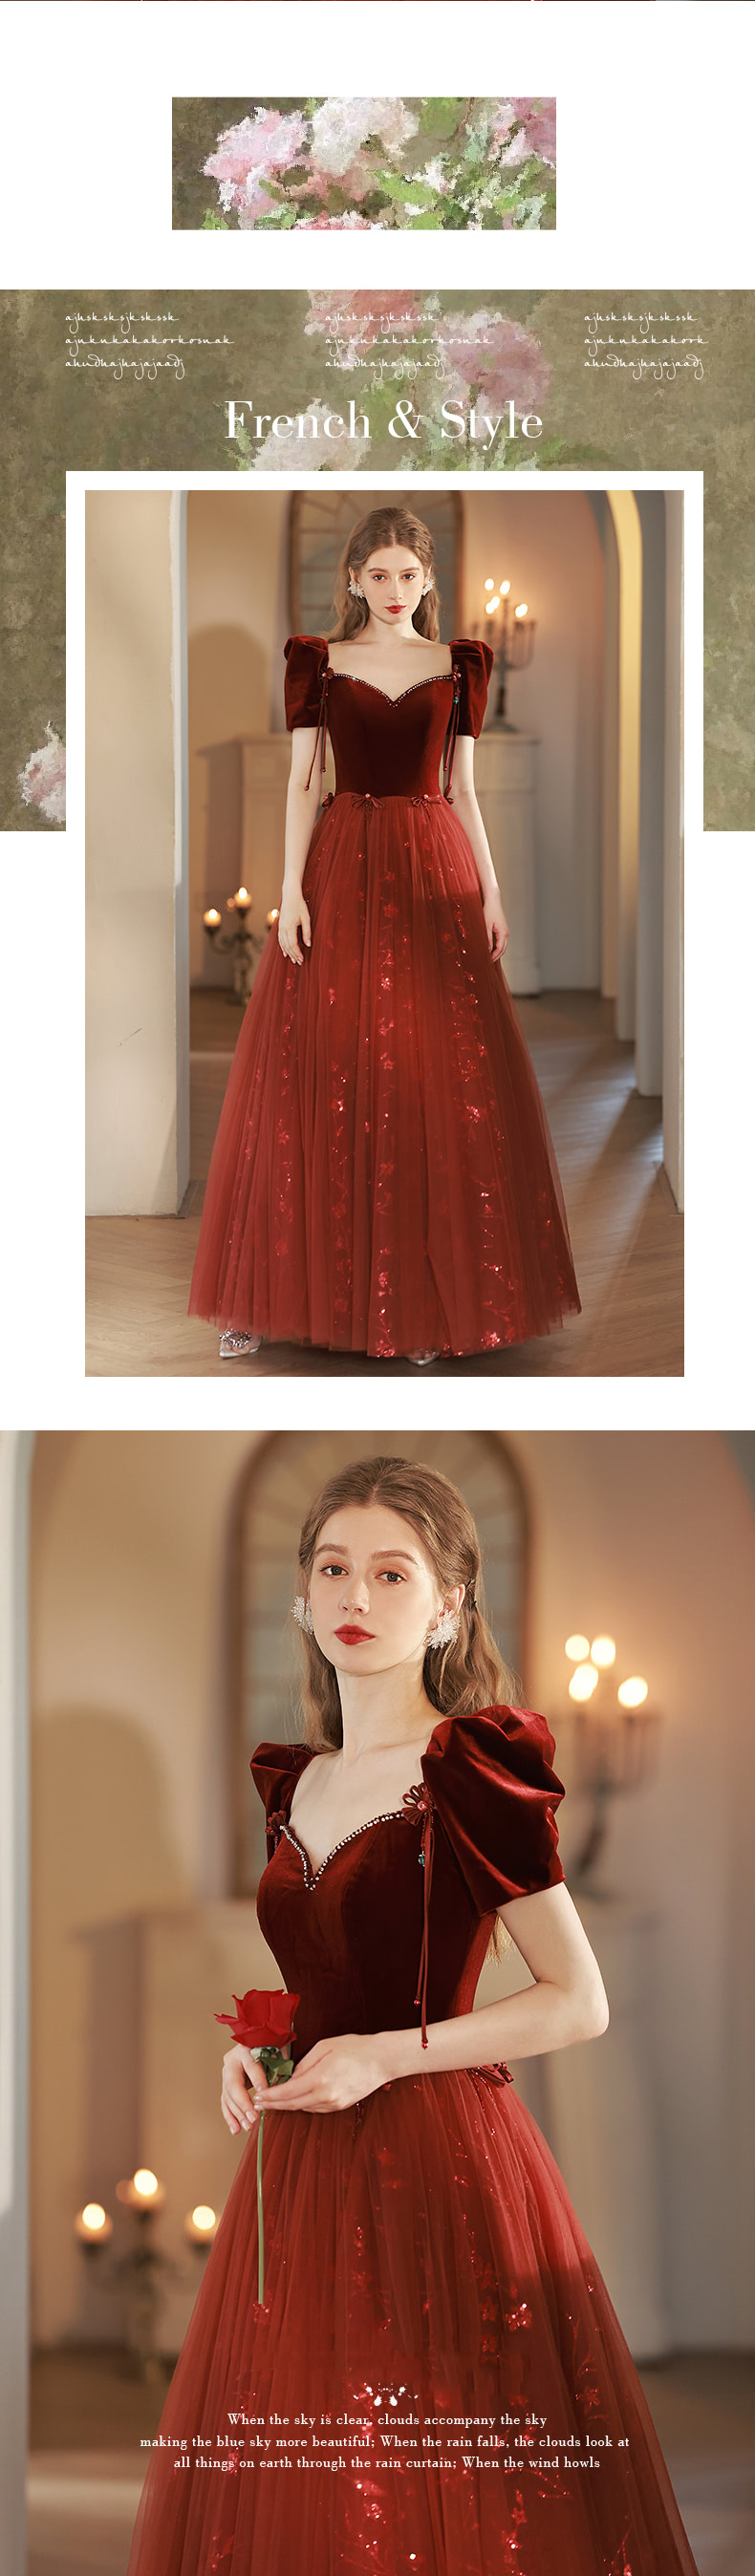 Vintage-Velvet-Embroidery-Evening-Party-Banquet-Long-Prom-Dress08.jpg